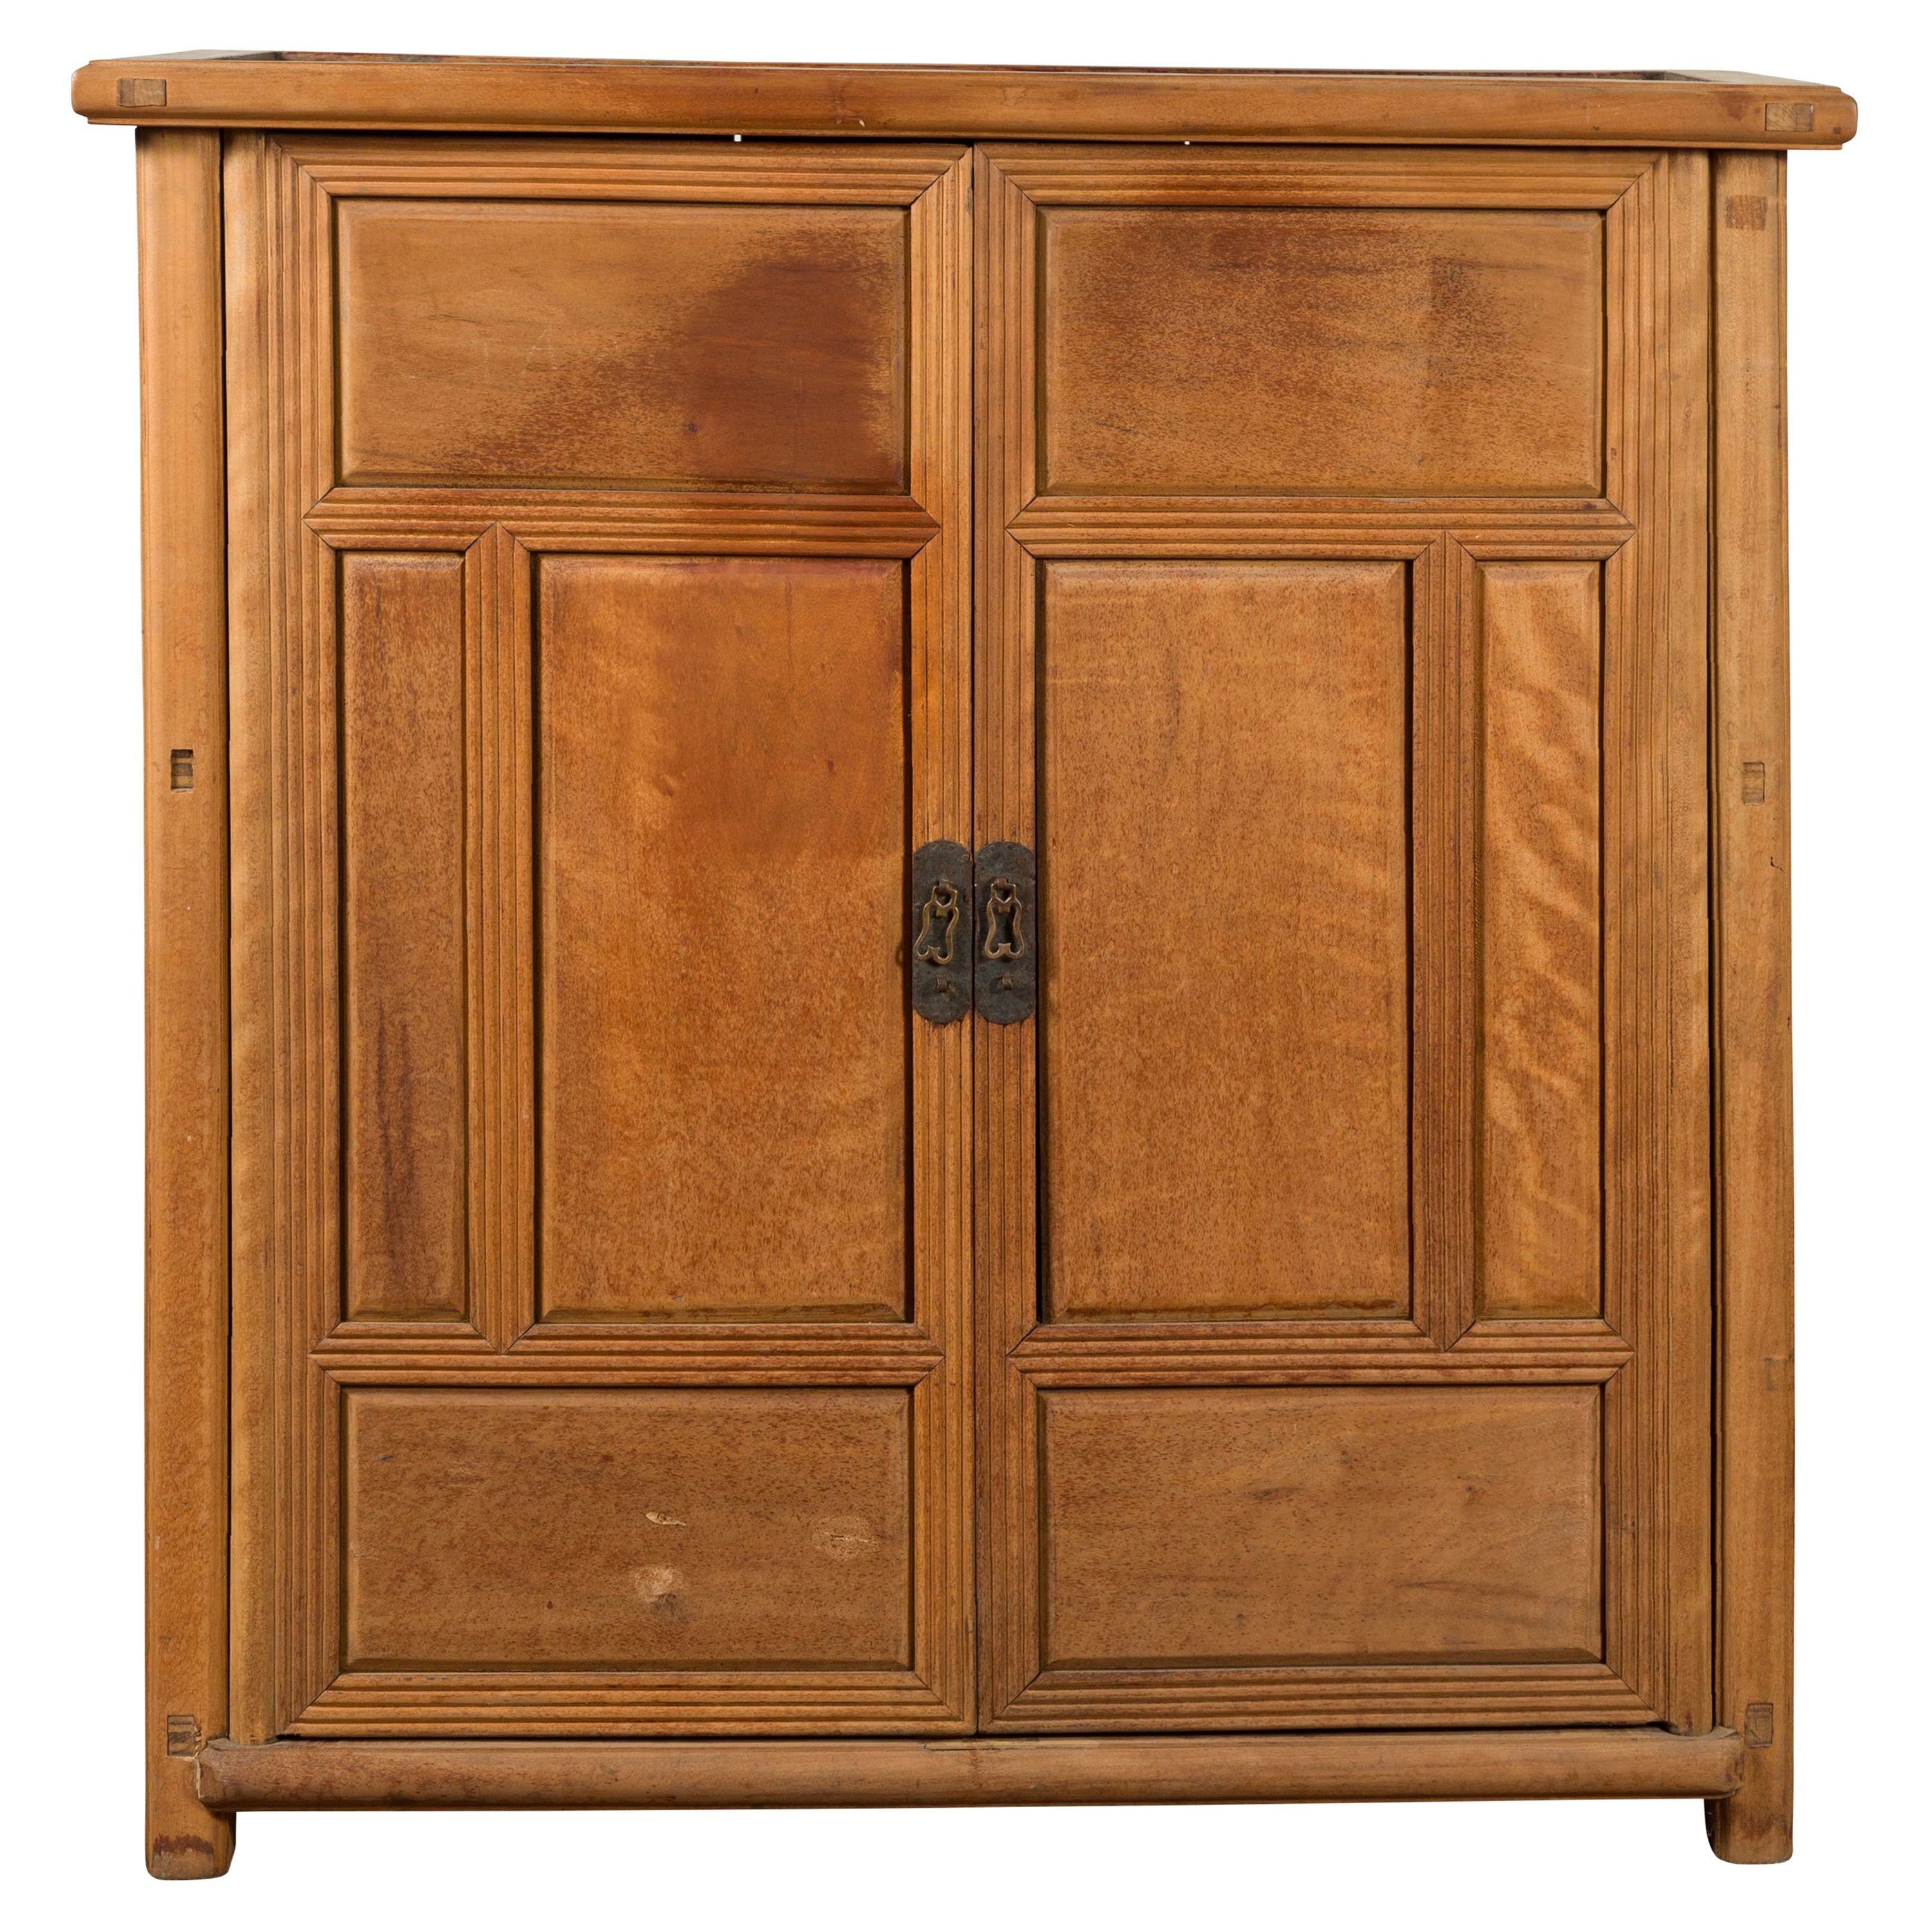 Chinese Vintage Natural Wood Finish Cabinet with Two Doors and Hidden Drawers